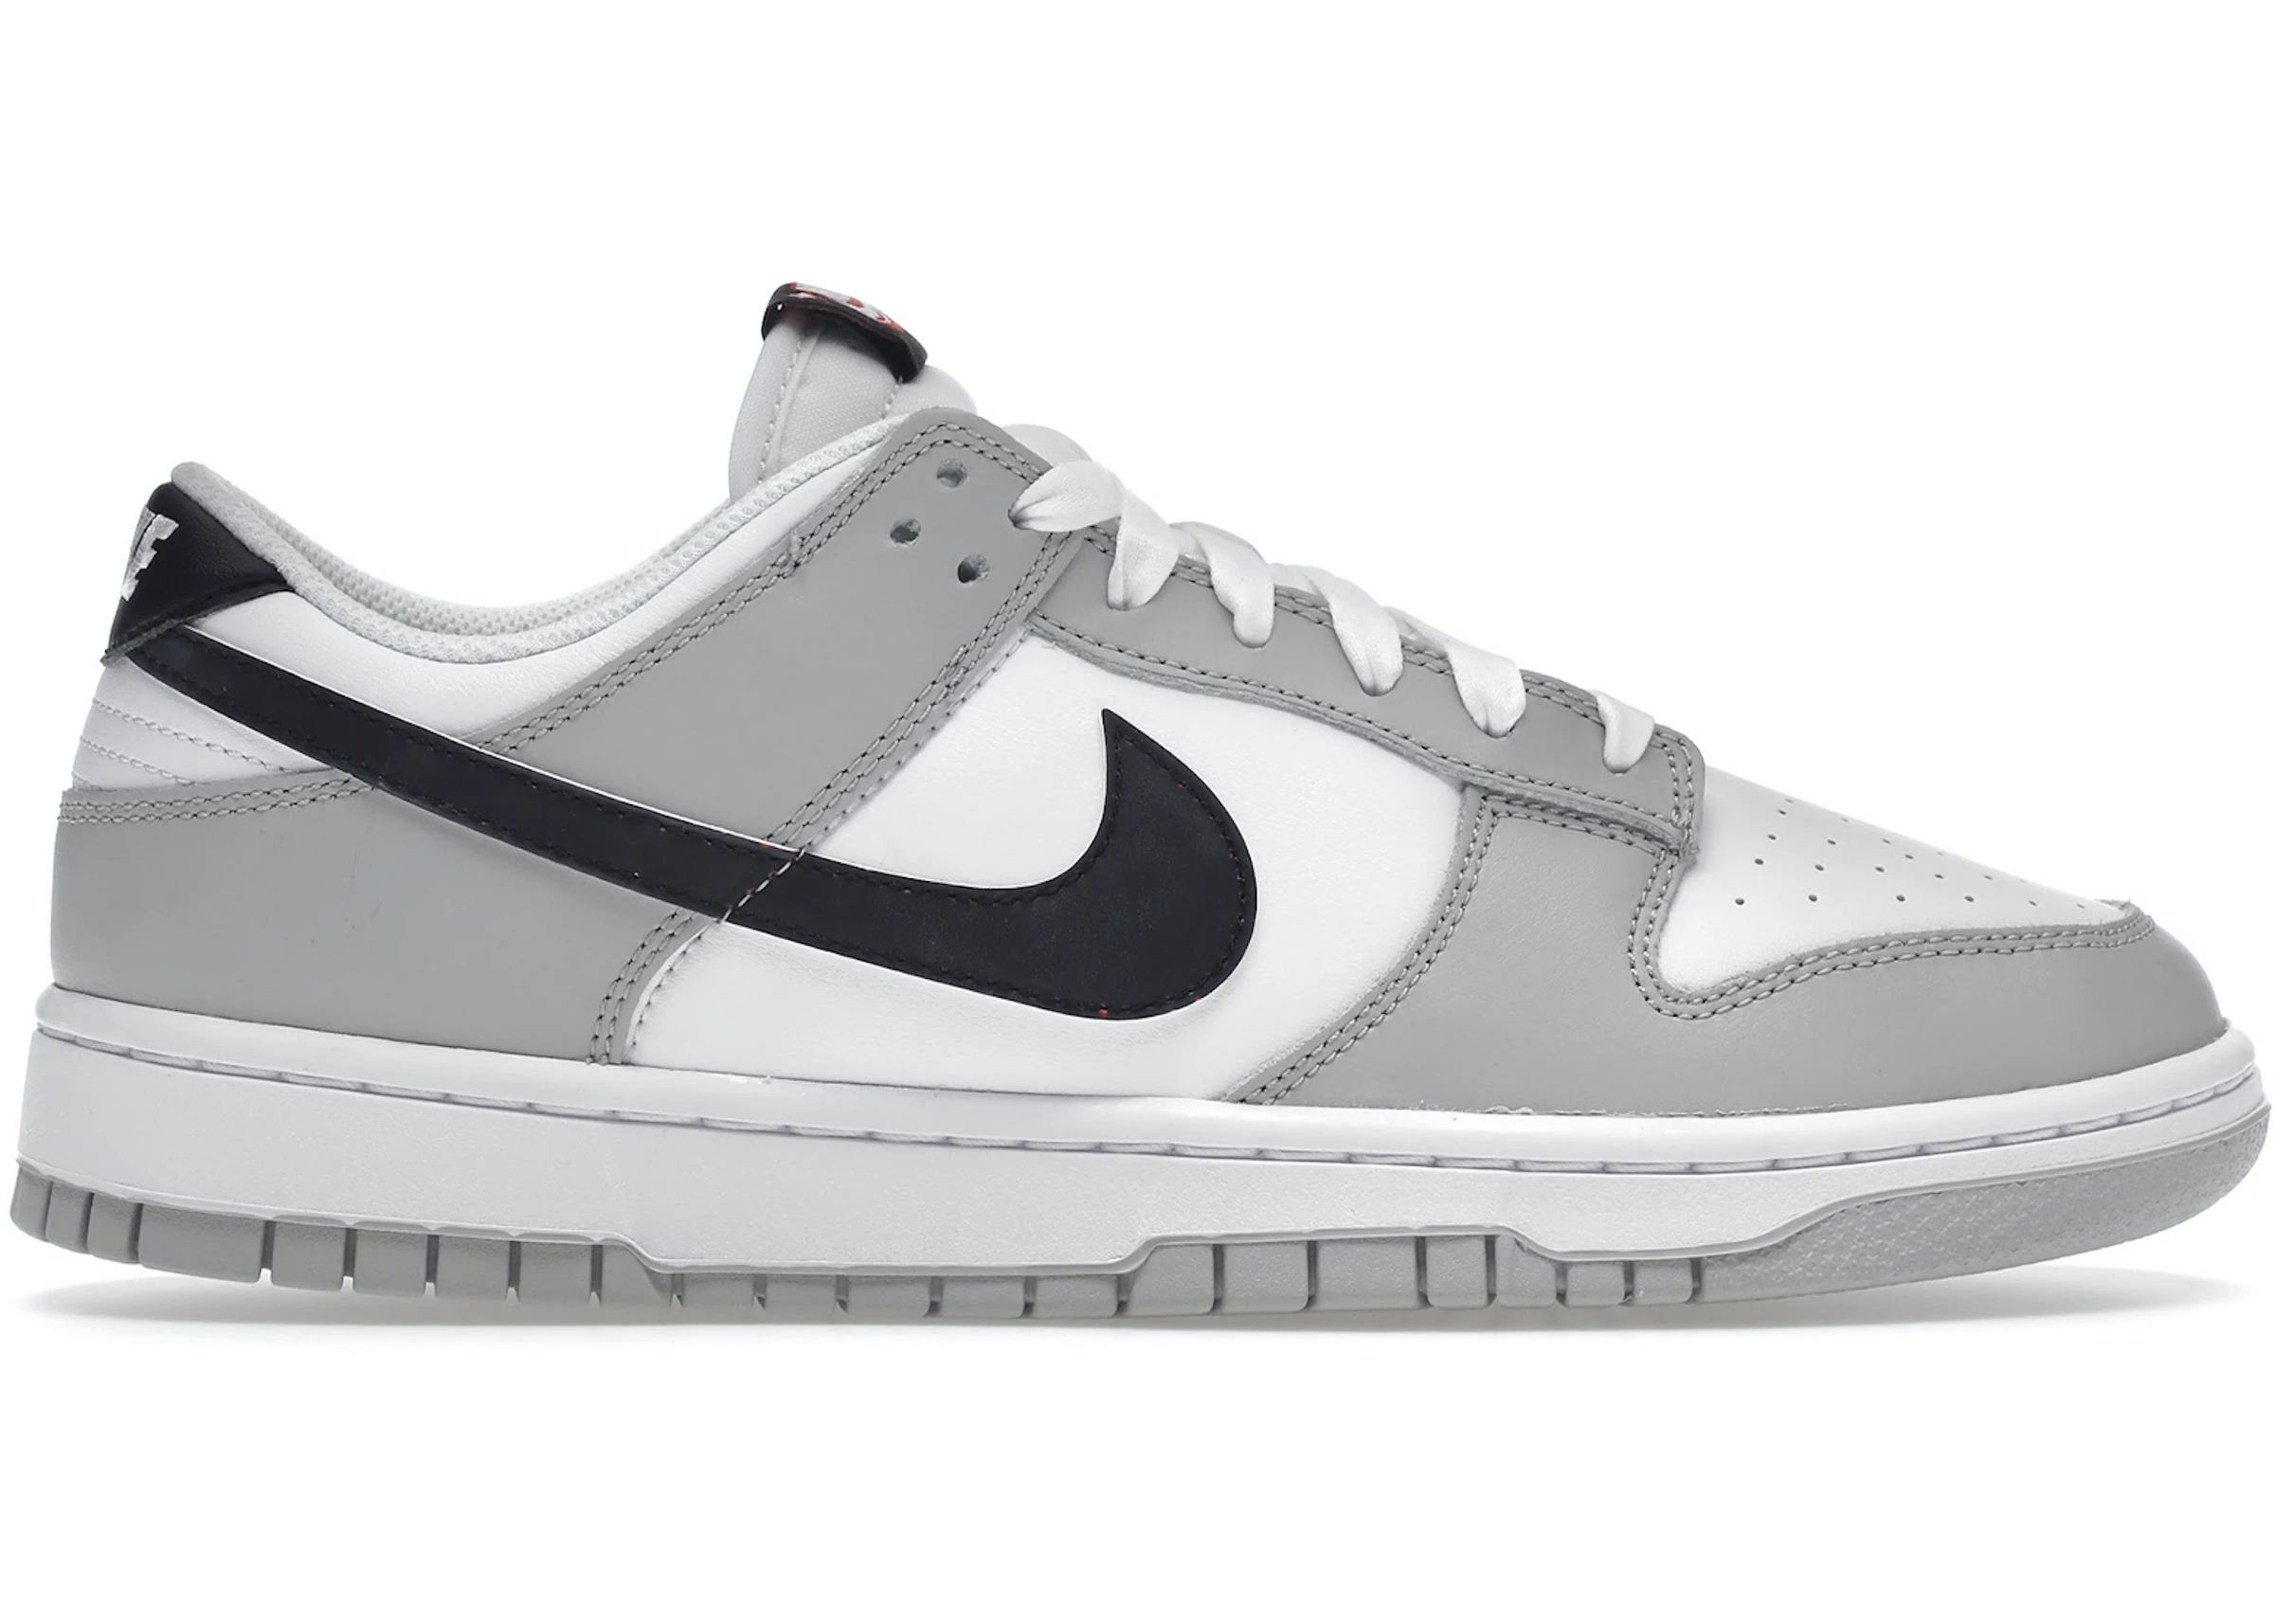 Nike Dunk Low undefeated dunk low black SE Lottery Pack Grey Fog